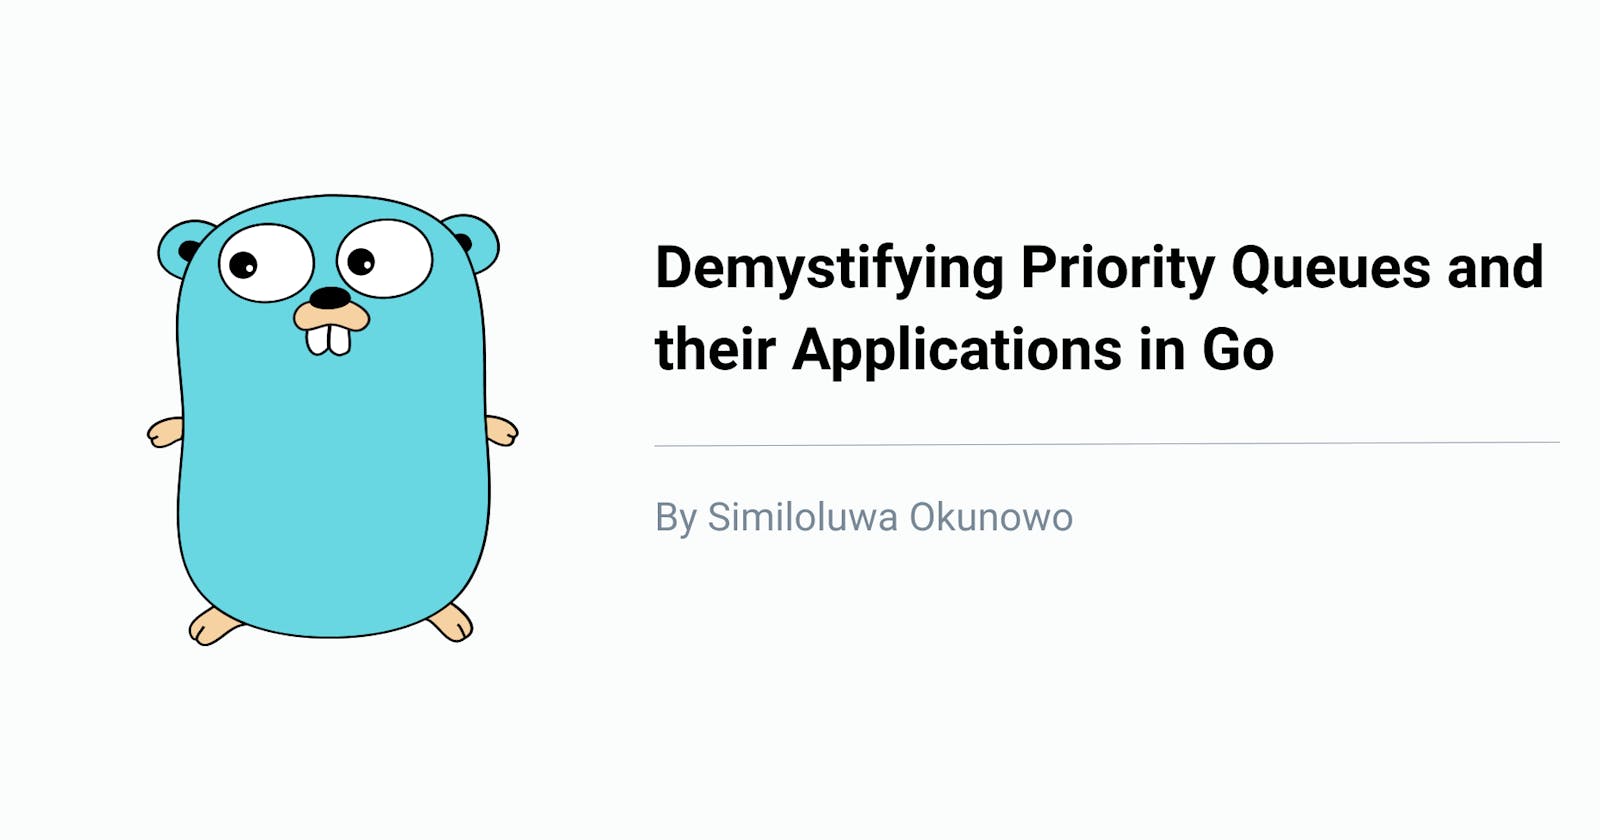 Demystifying Priority Queues and Applications in Go